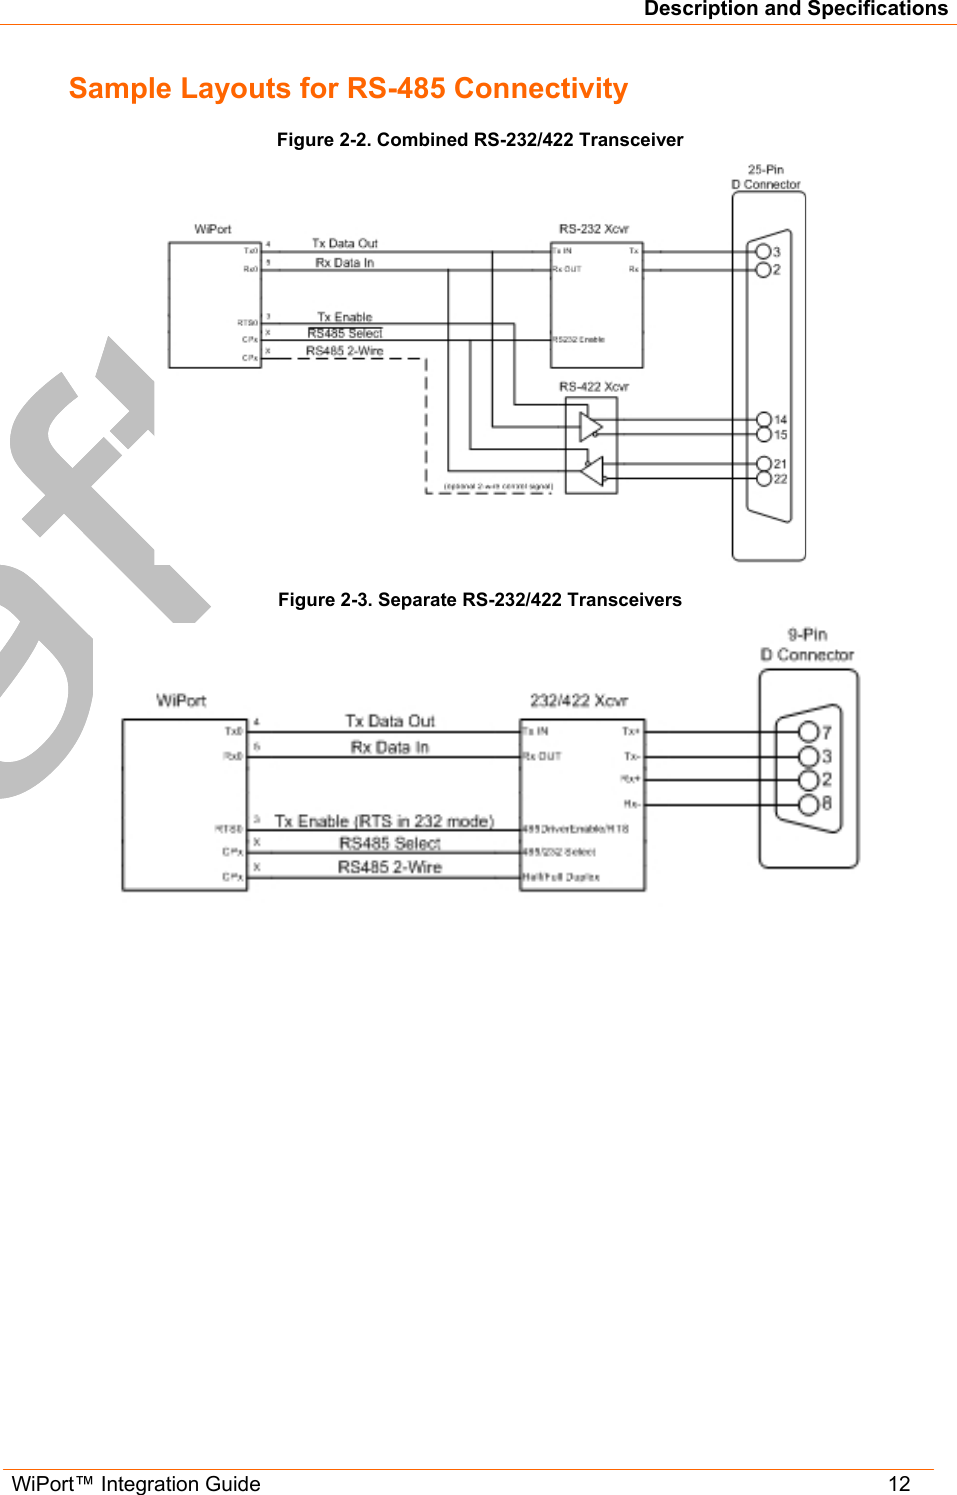 Description and Specifications WiPort™ Integration Guide   12 Sample Layouts for RS-485 Connectivity Figure 2-2. Combined RS-232/422 Transceiver  Figure 2-3. Separate RS-232/422 Transceivers  